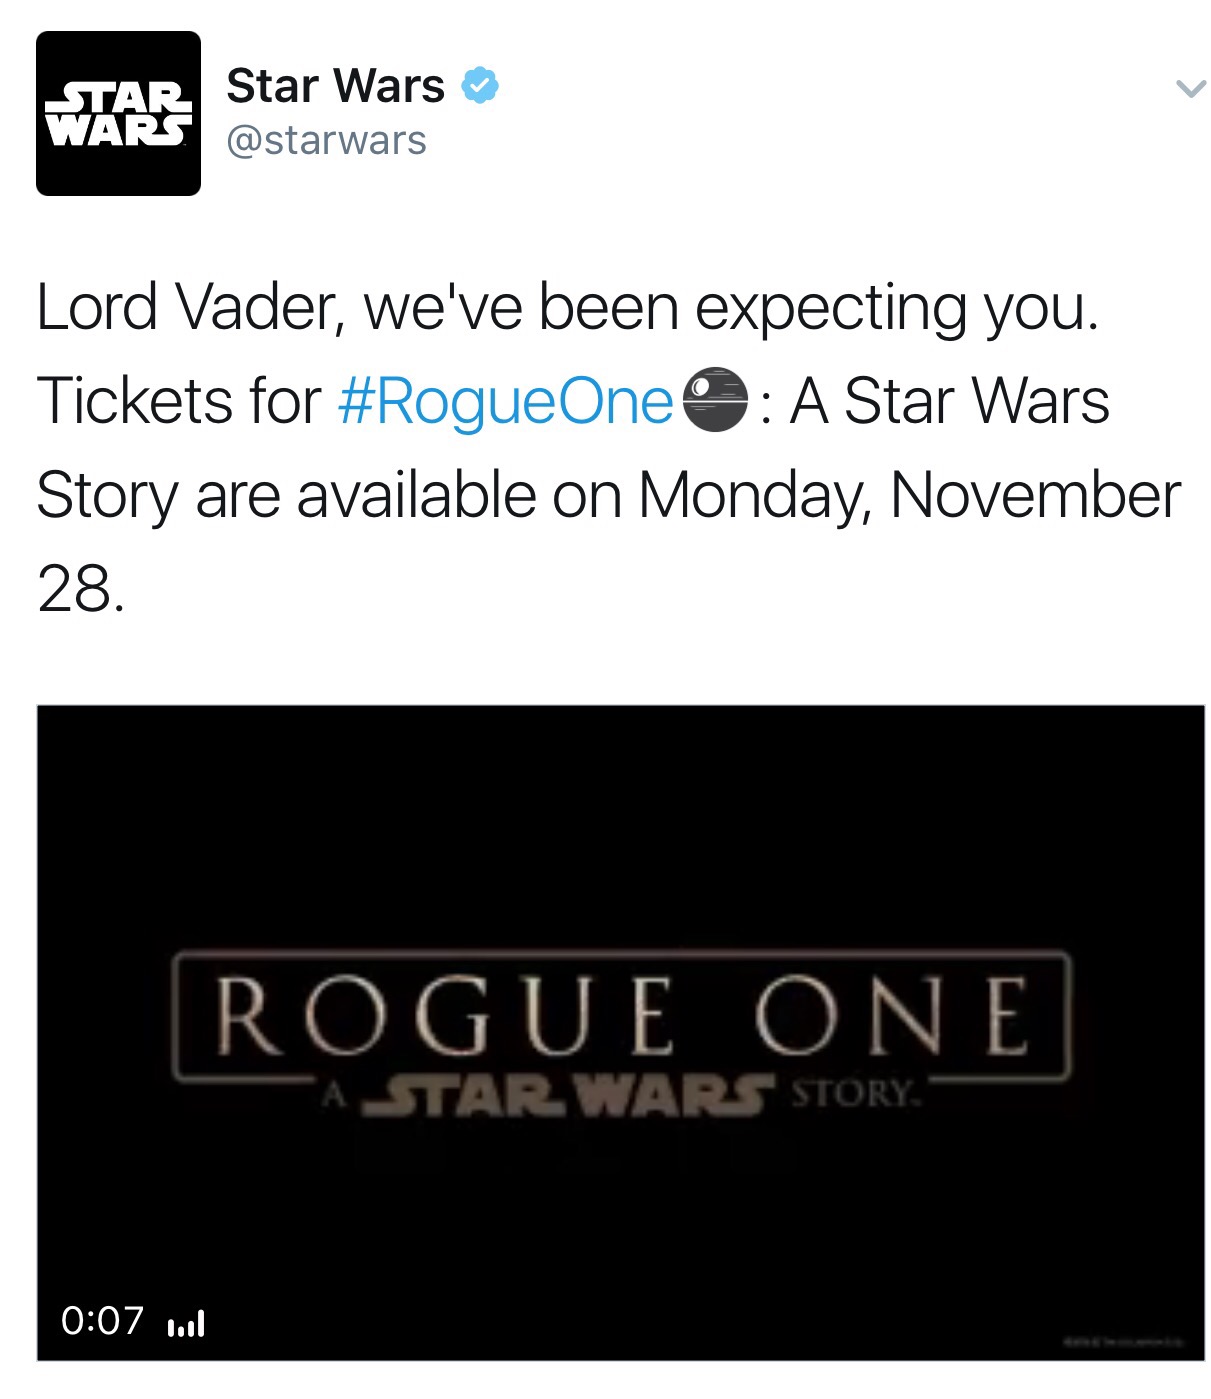 Star Wars Rogue One Tickets On Sale Monday, November 28th at 12:01AM